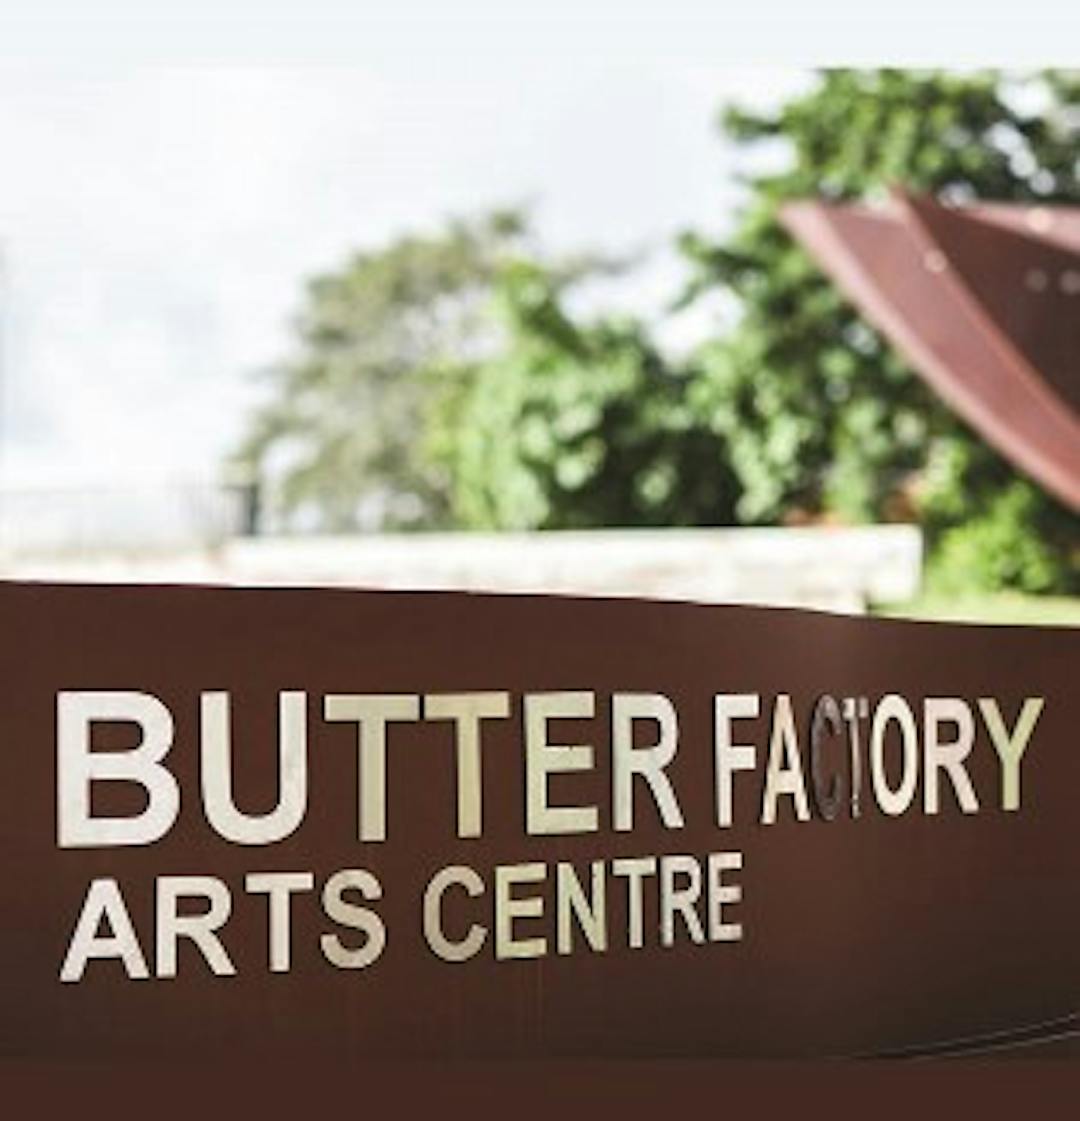 Butter Factory Arts Centre entry sign